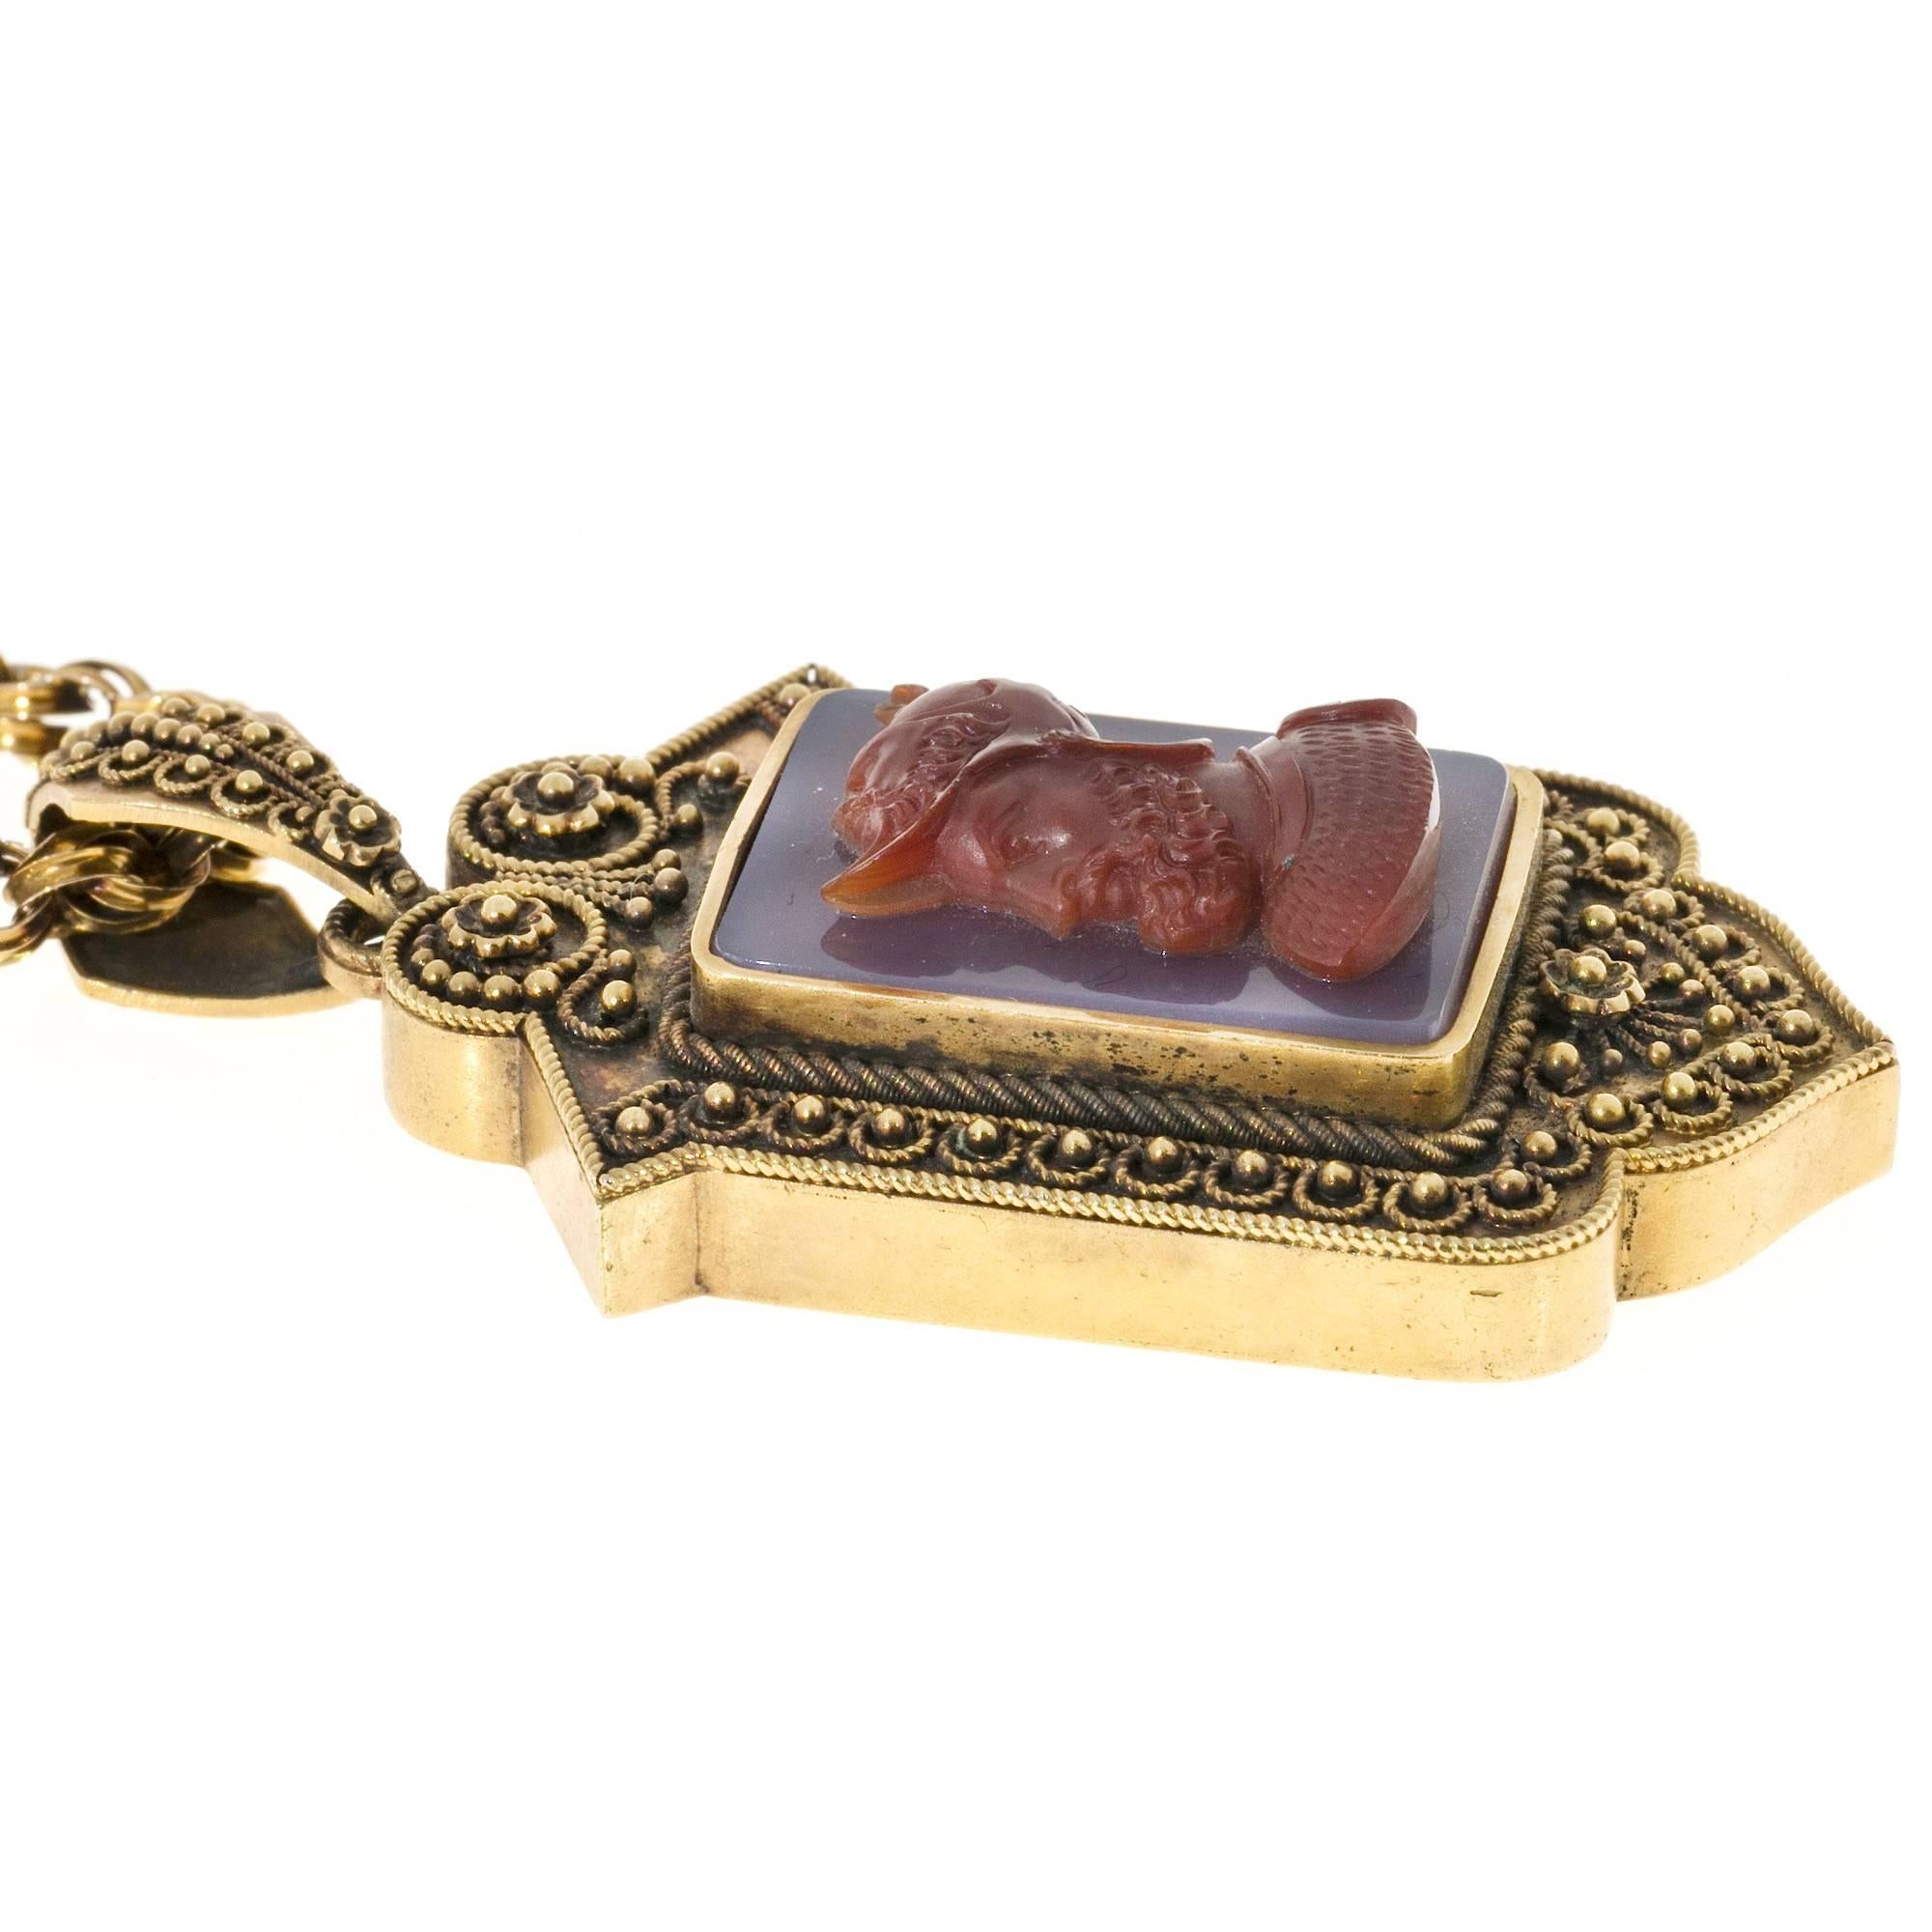 Authentic original Victorian 14k handmade granulated top gold pendant locket. The front is set with a beautiful hand carved Carnelian hardstone Cameo of a helmeted solider. Original frames backing and glass. The carving is signed Mears and with